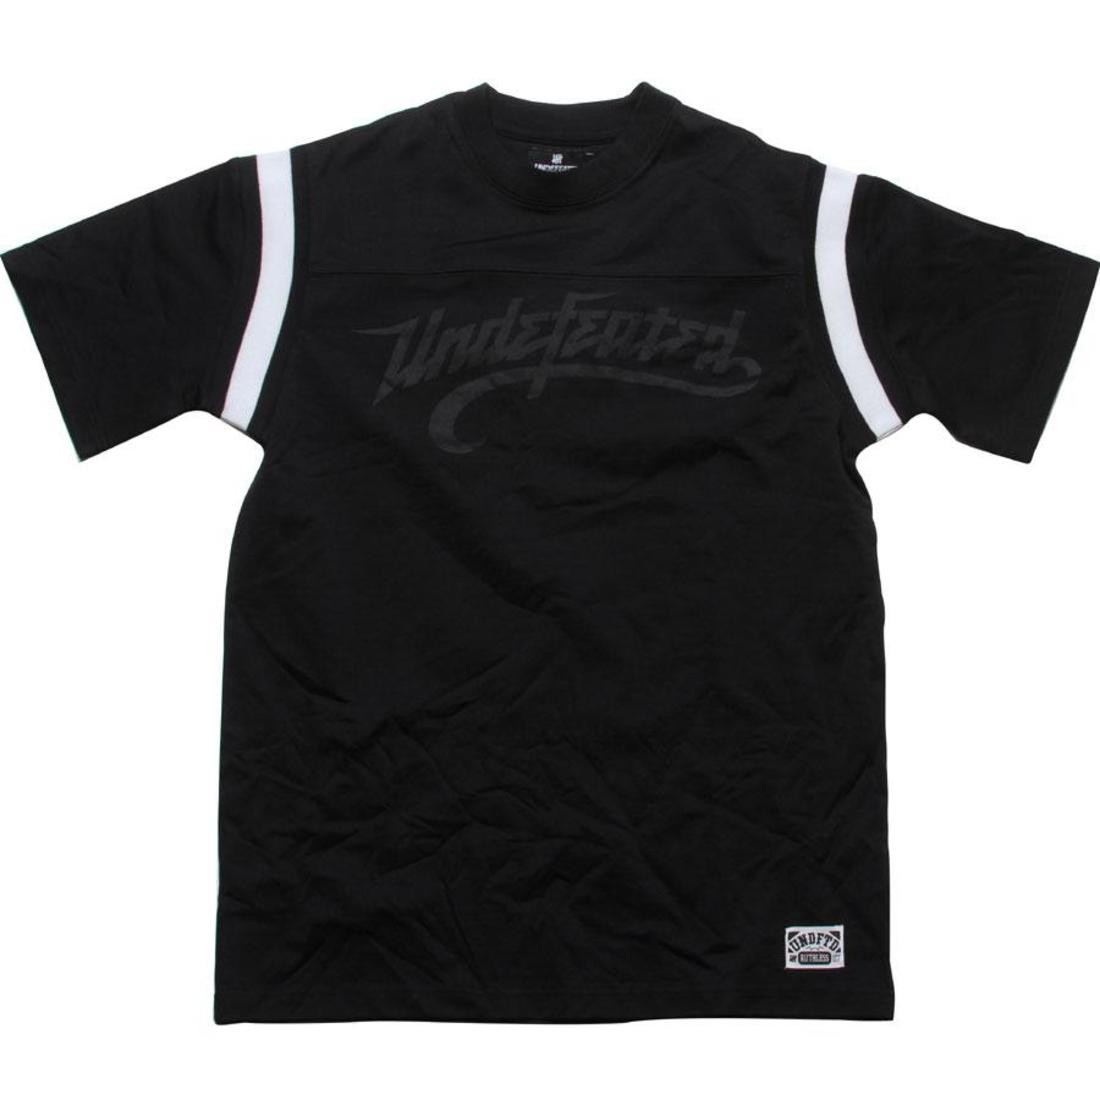 Undefeated Football Top (black)